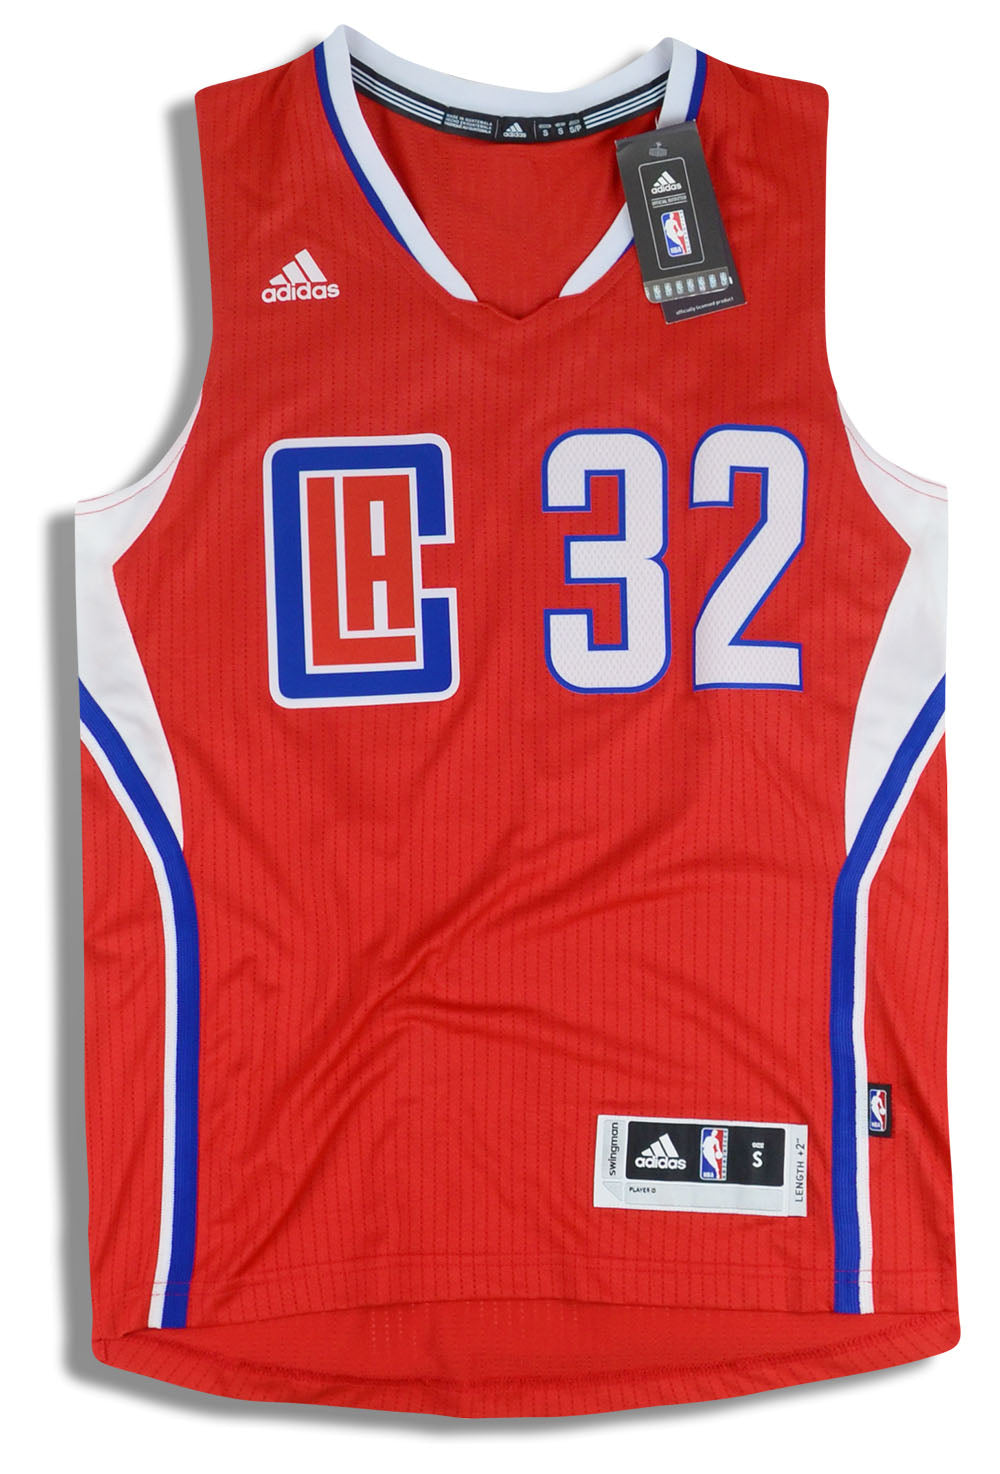 Blake Griffin Los Angeles Clippers Alternate #32 Jersey player shirt